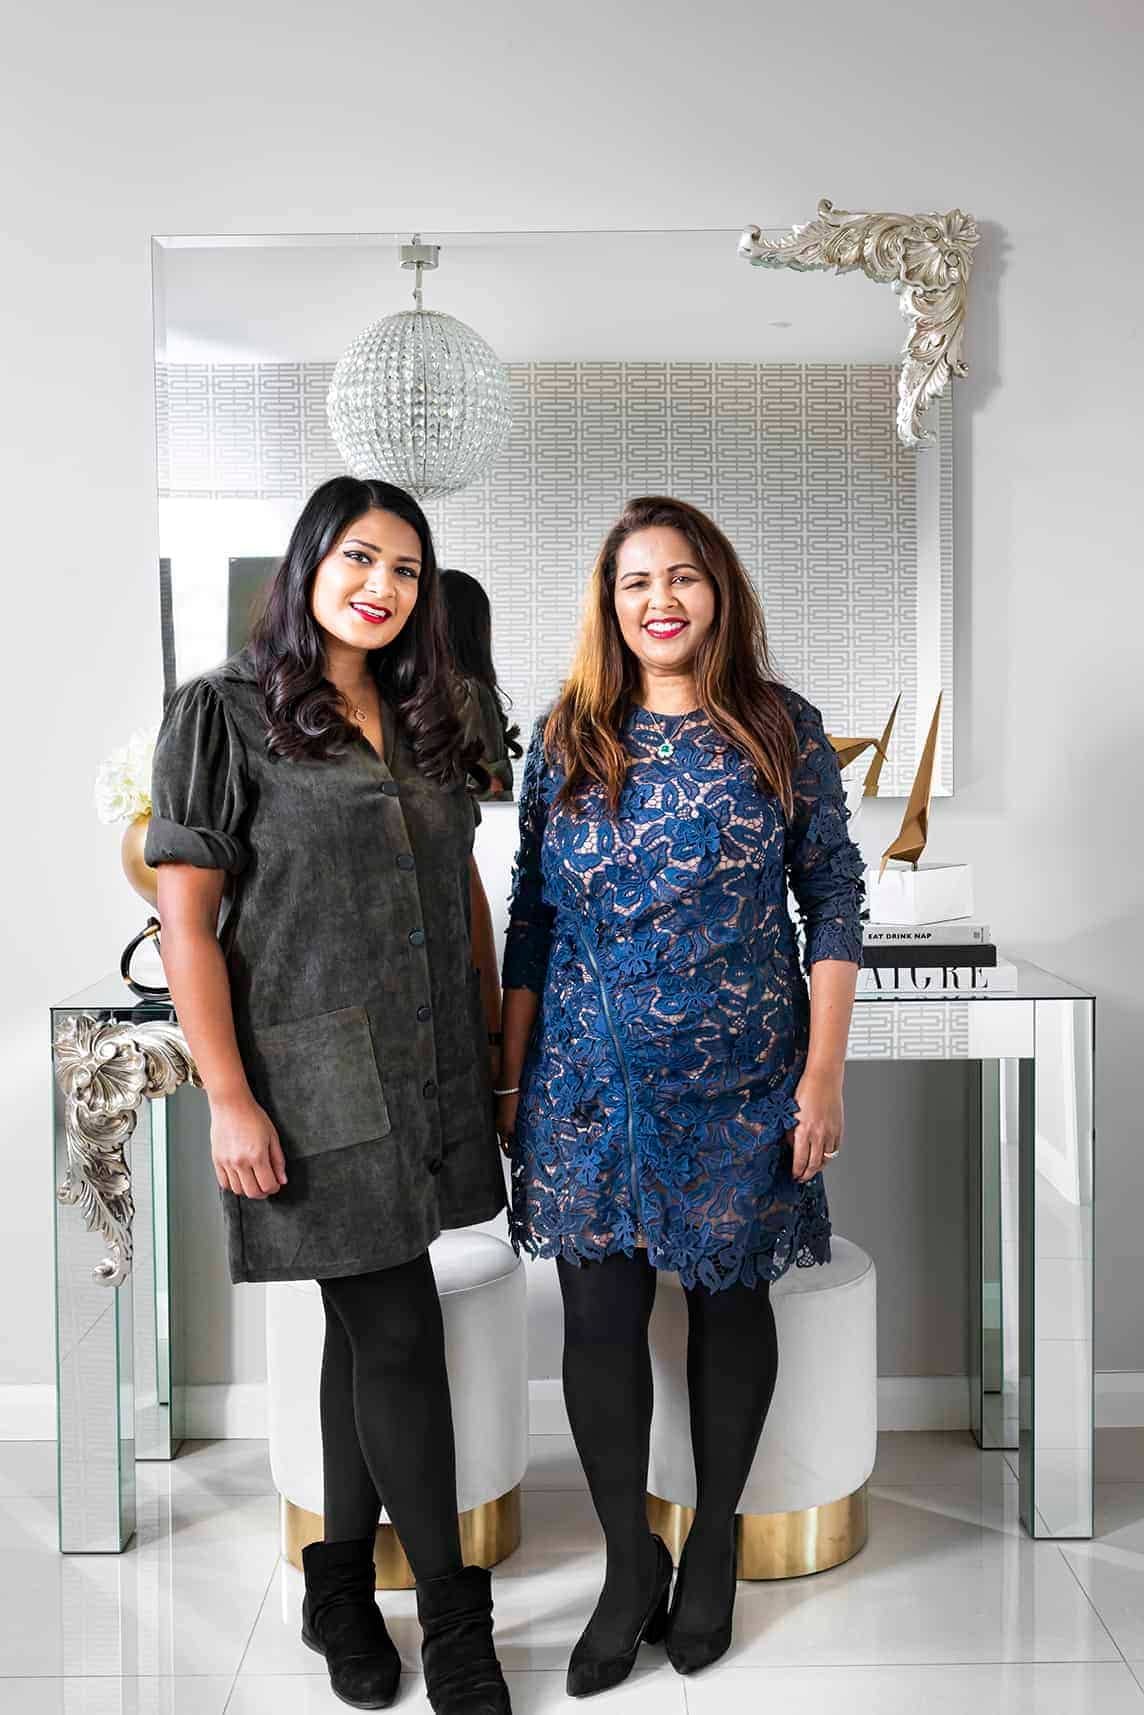 Vandana and Megha, our Interior Designers for Ealing